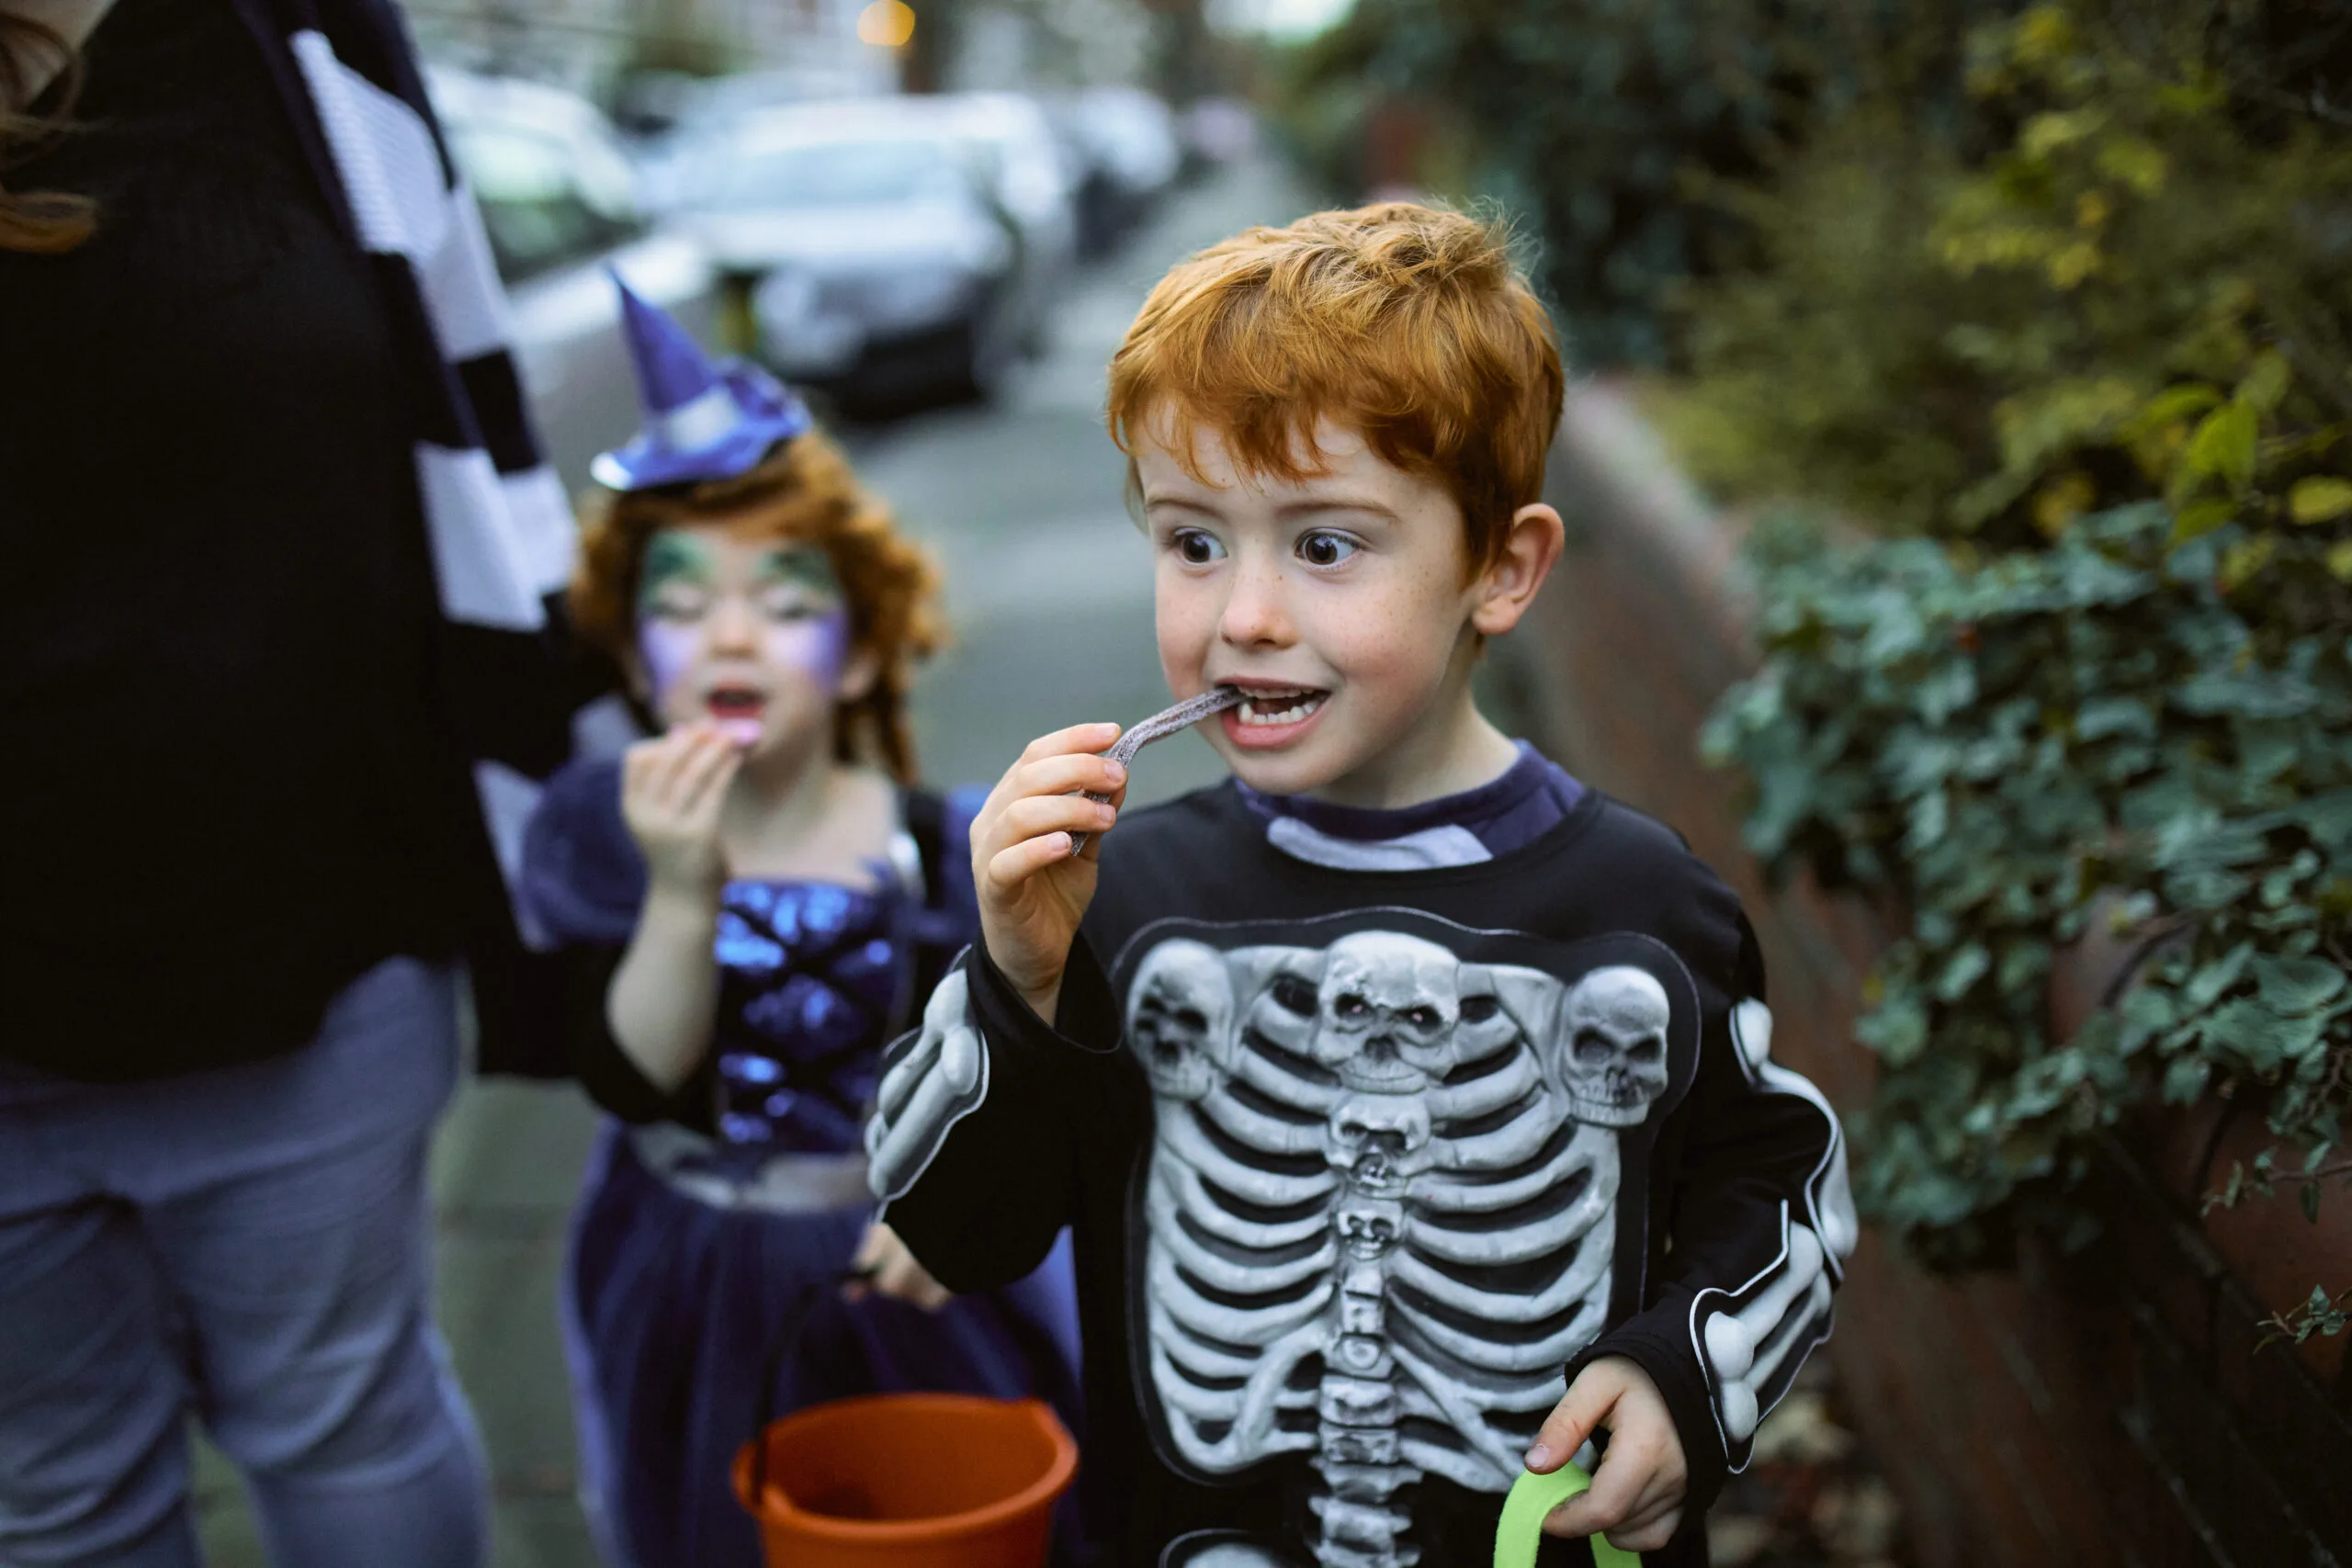 Little boy eating halloween candy while trick or treating in suburban streets with his mother and sister.